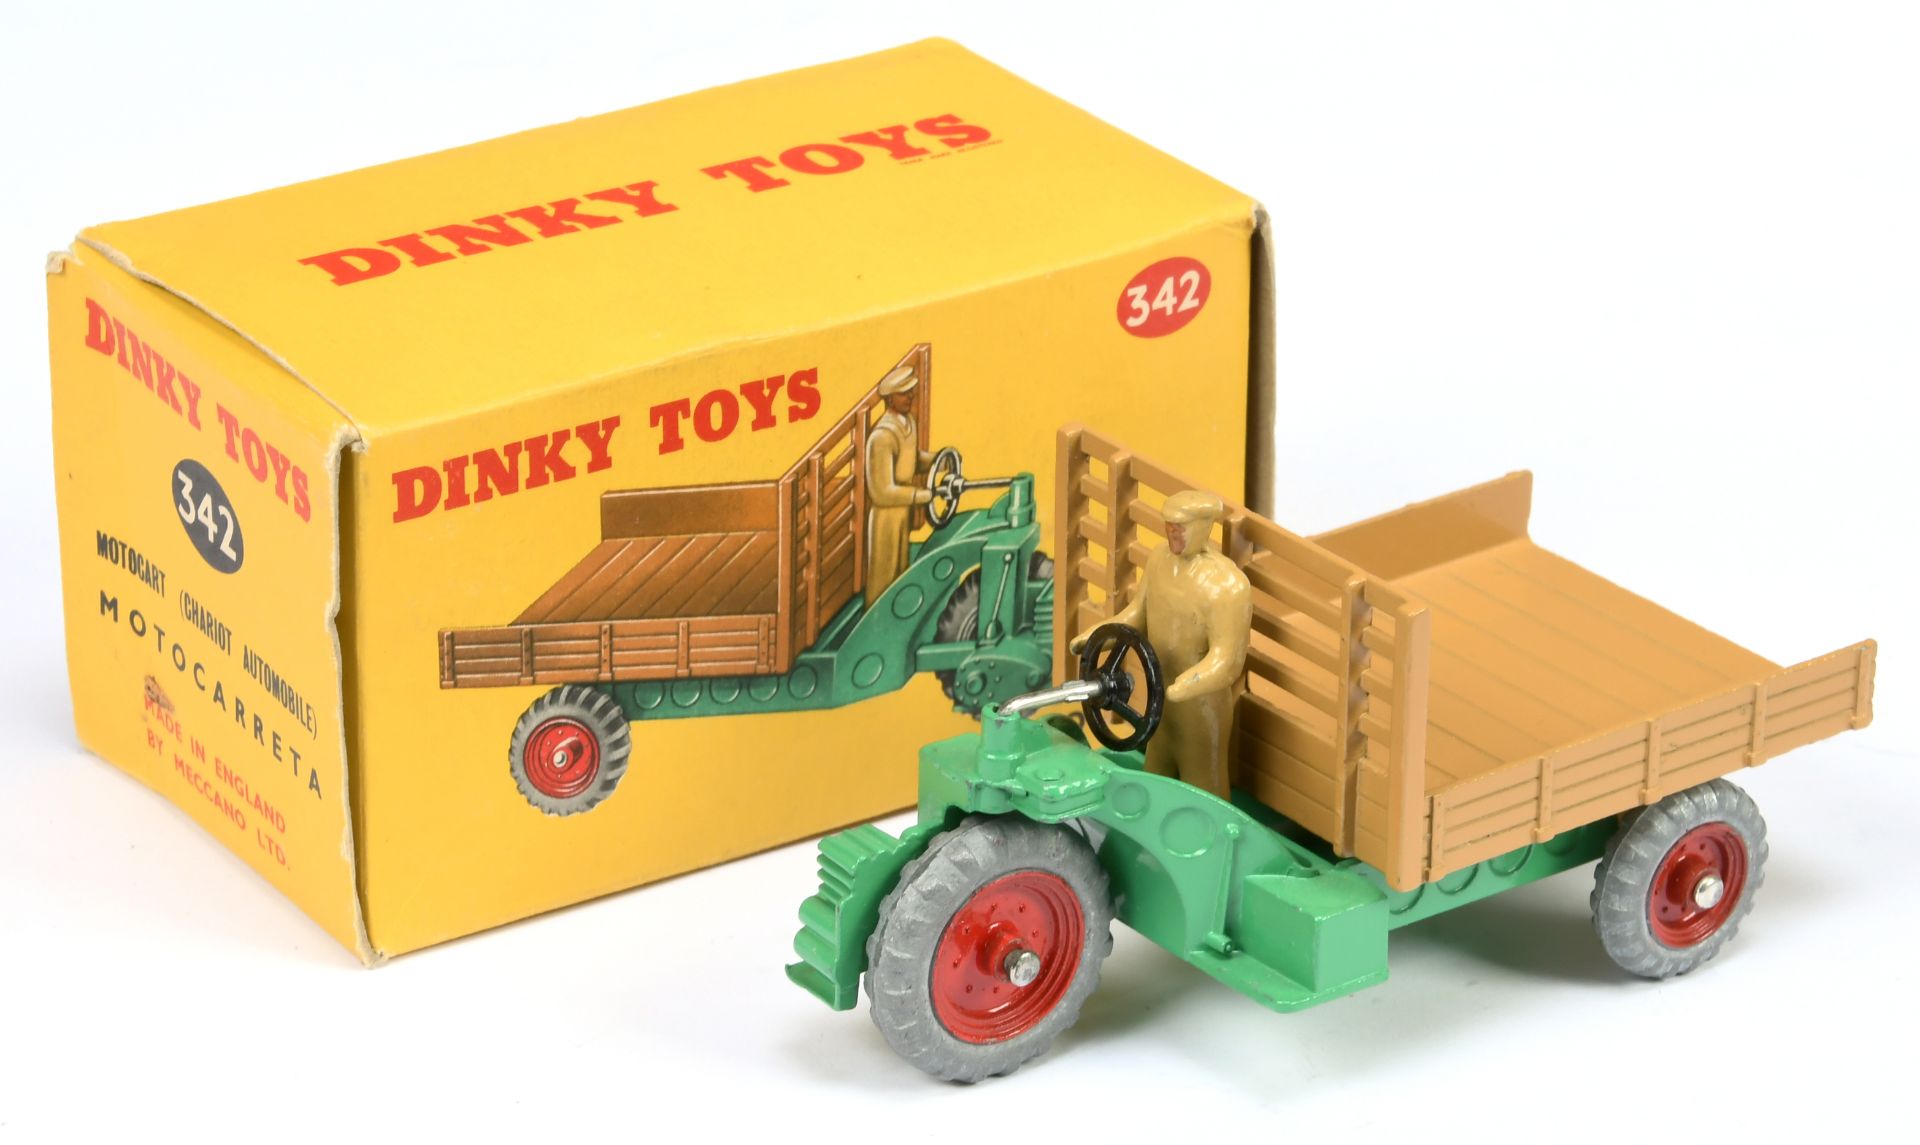 Dinky Toys 342 Motorcart - Mid green including chassis, tan back and figure, red metal wheels 